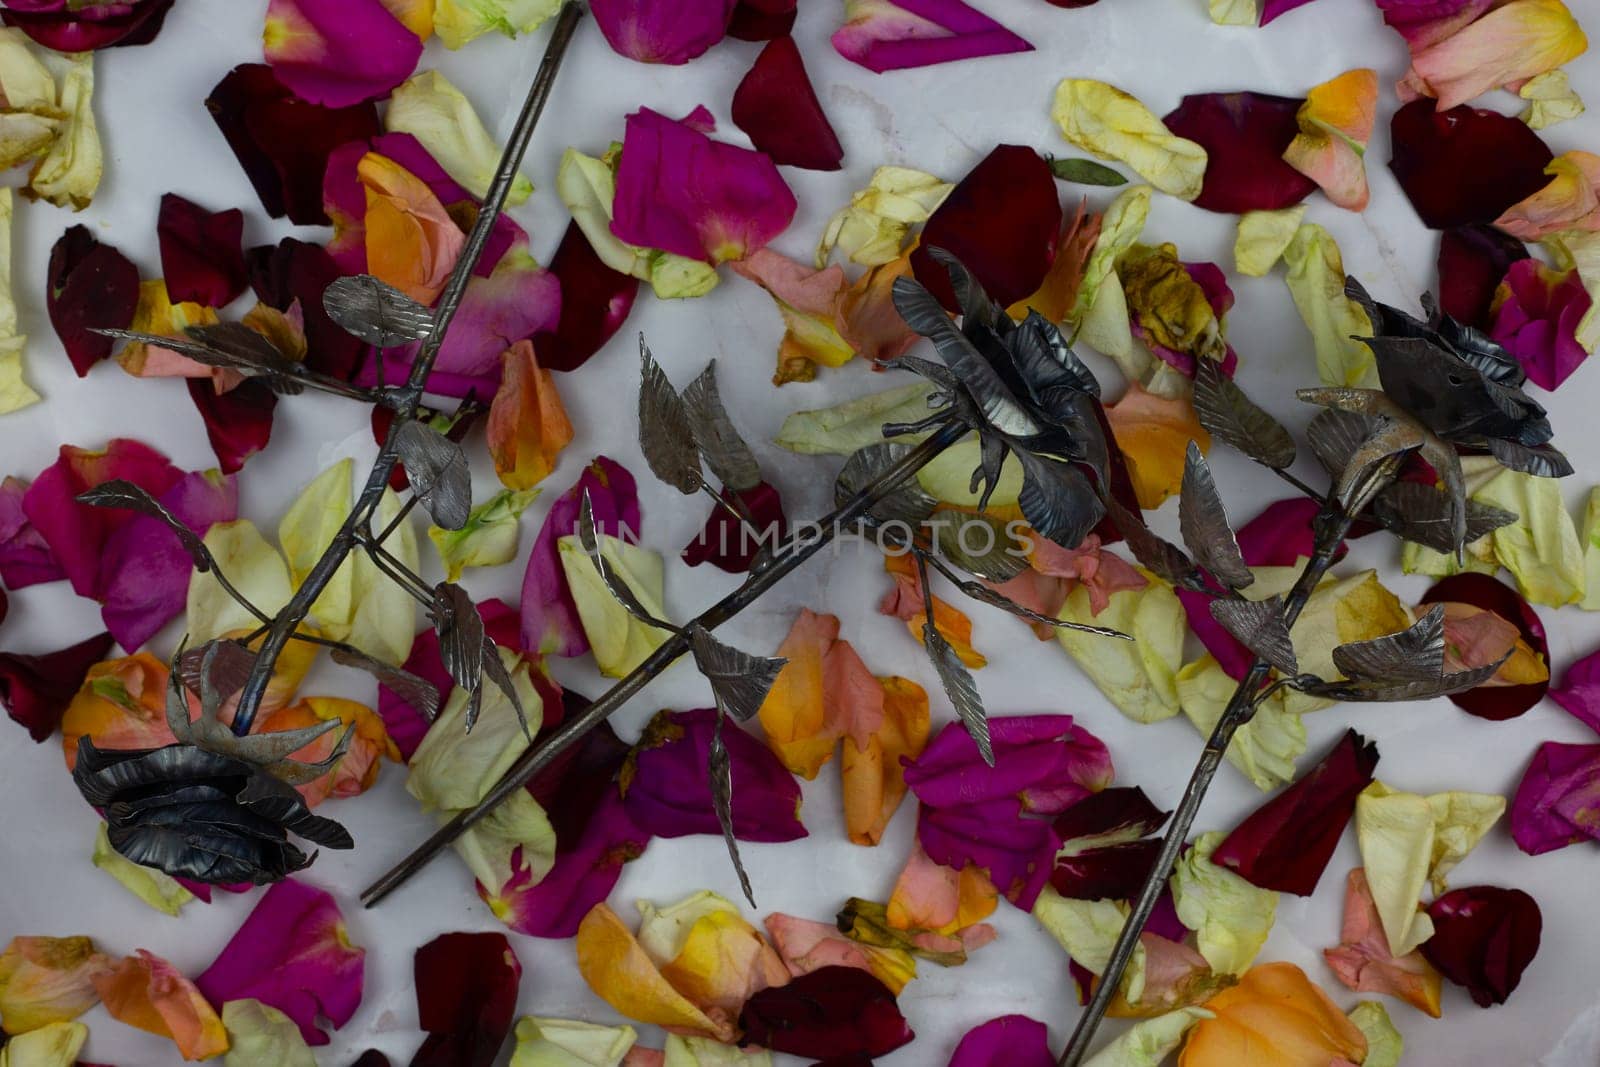 Unusual flowers for gift, metal roses against background of fresh flower petals